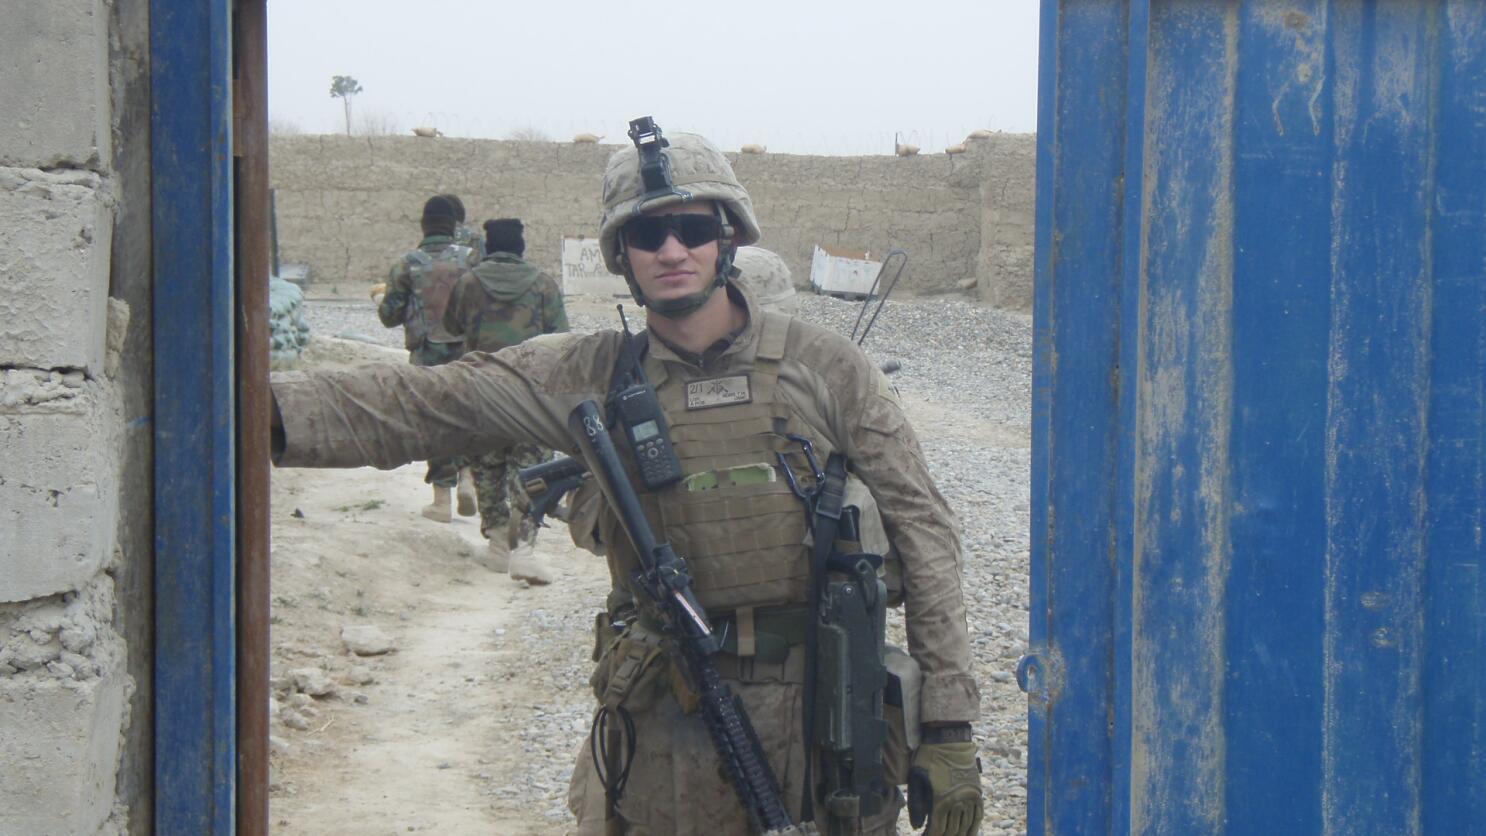 Former NFL player dies in Afghan firefight